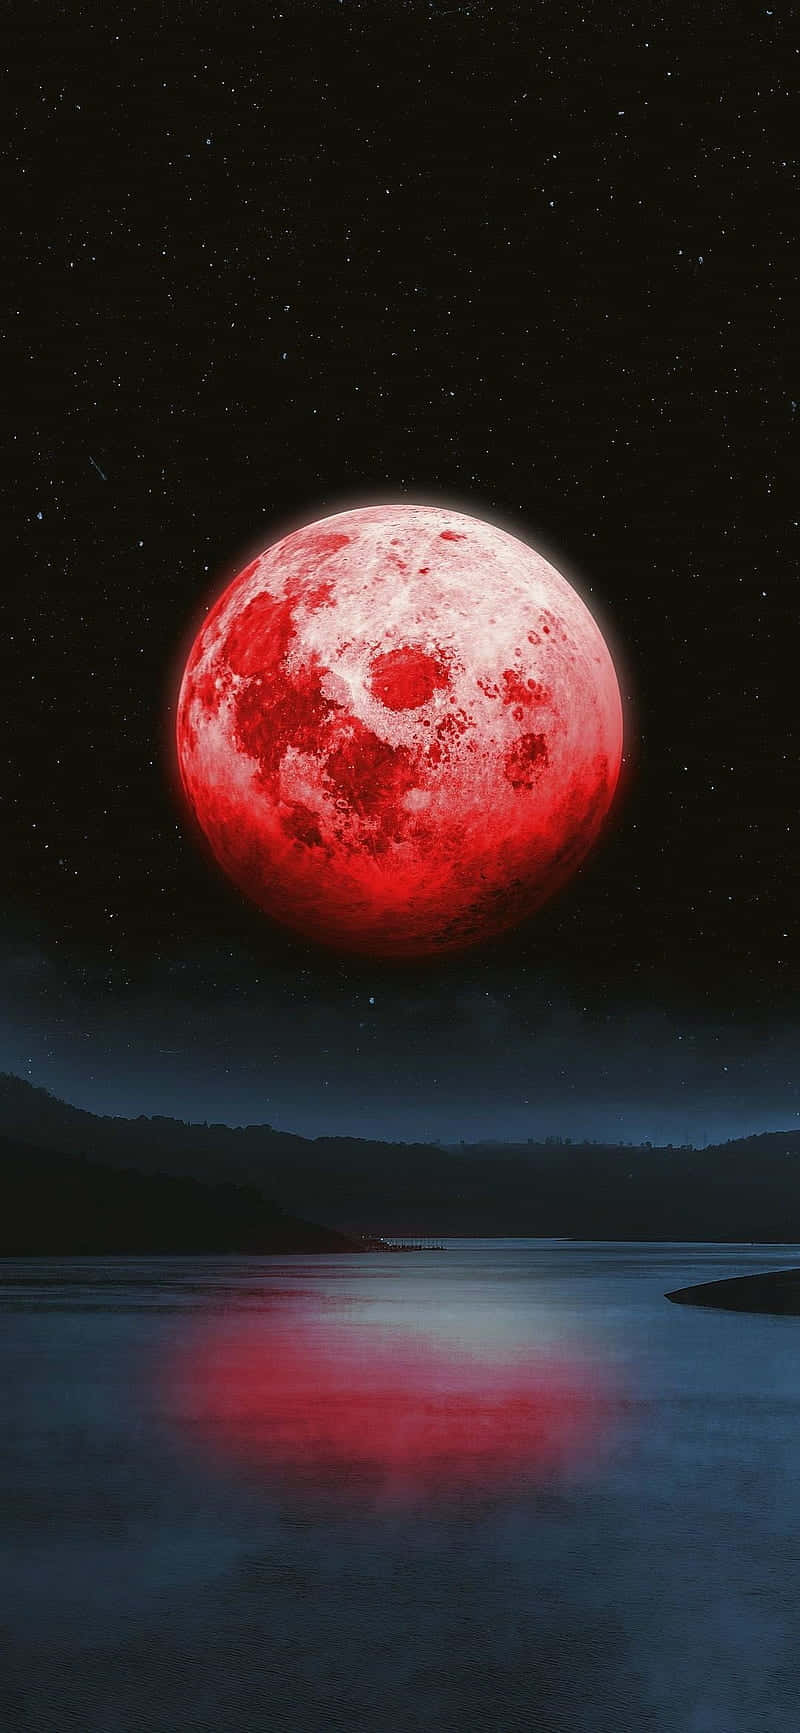 Download wallpaper 1350x2400 full moon eclipse red moon fiery moon iphone  876s6 for parallax hd background